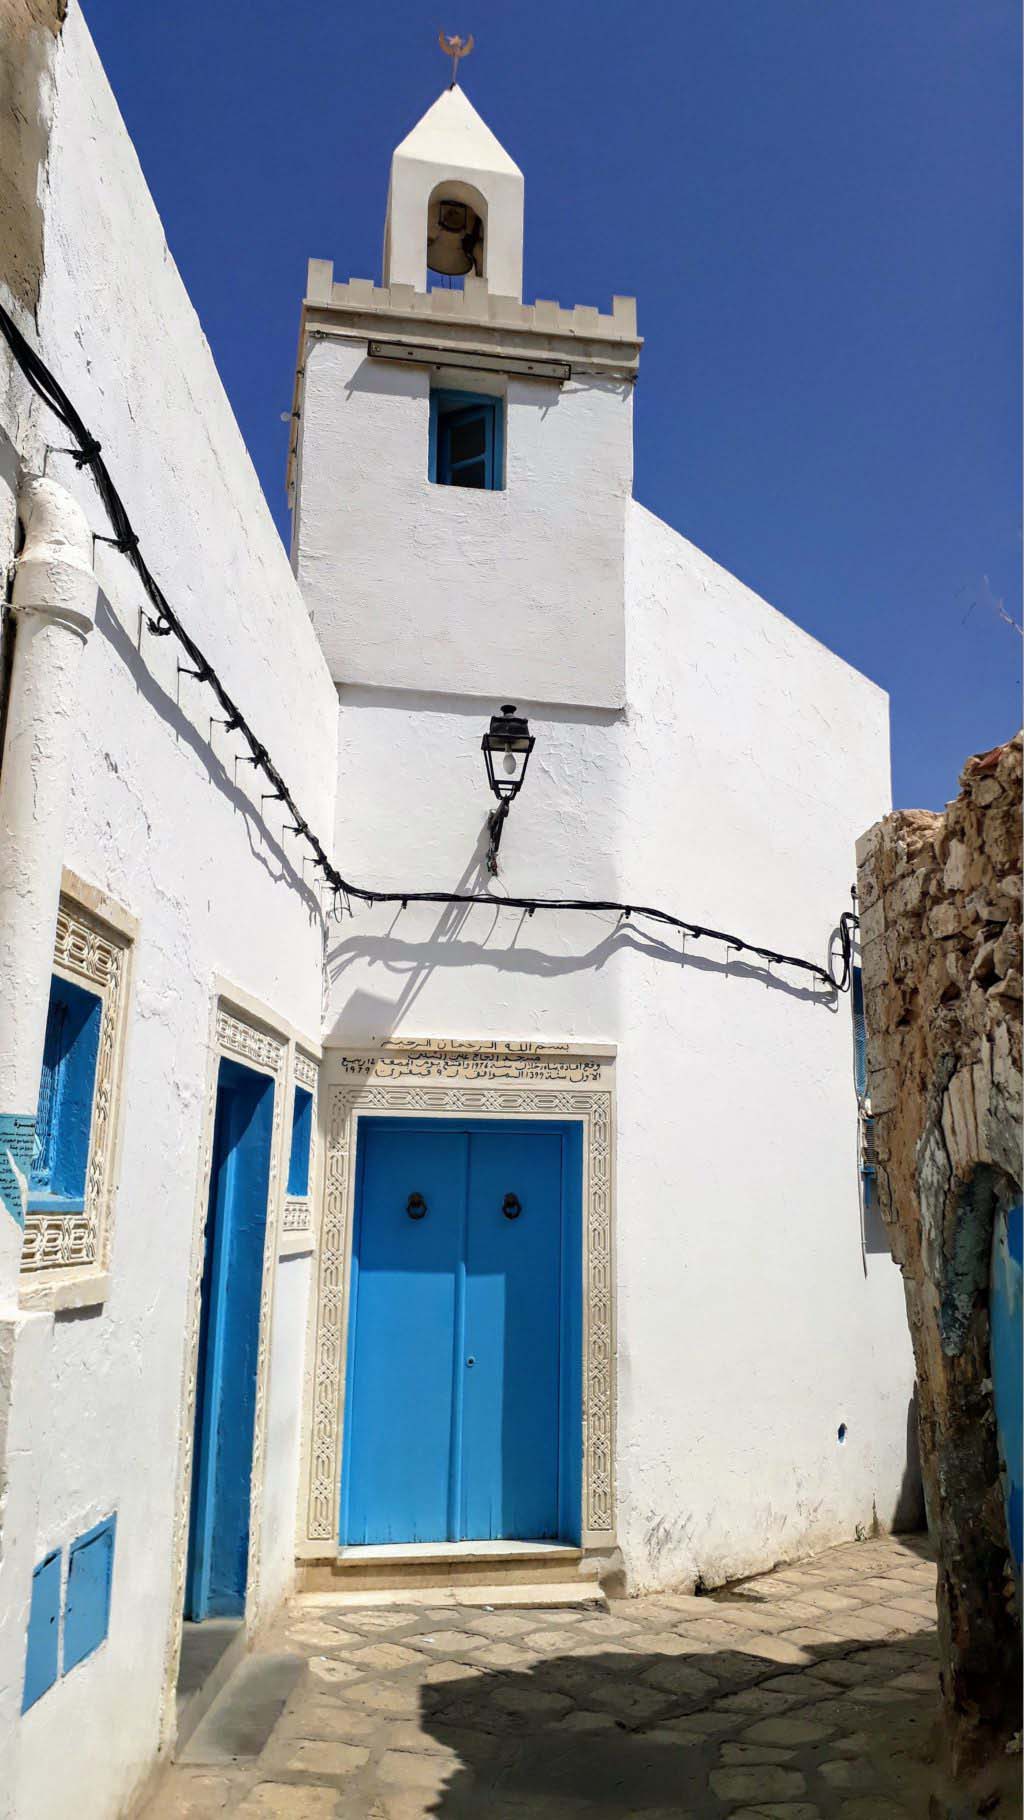 Building at the kasbah in Sousse